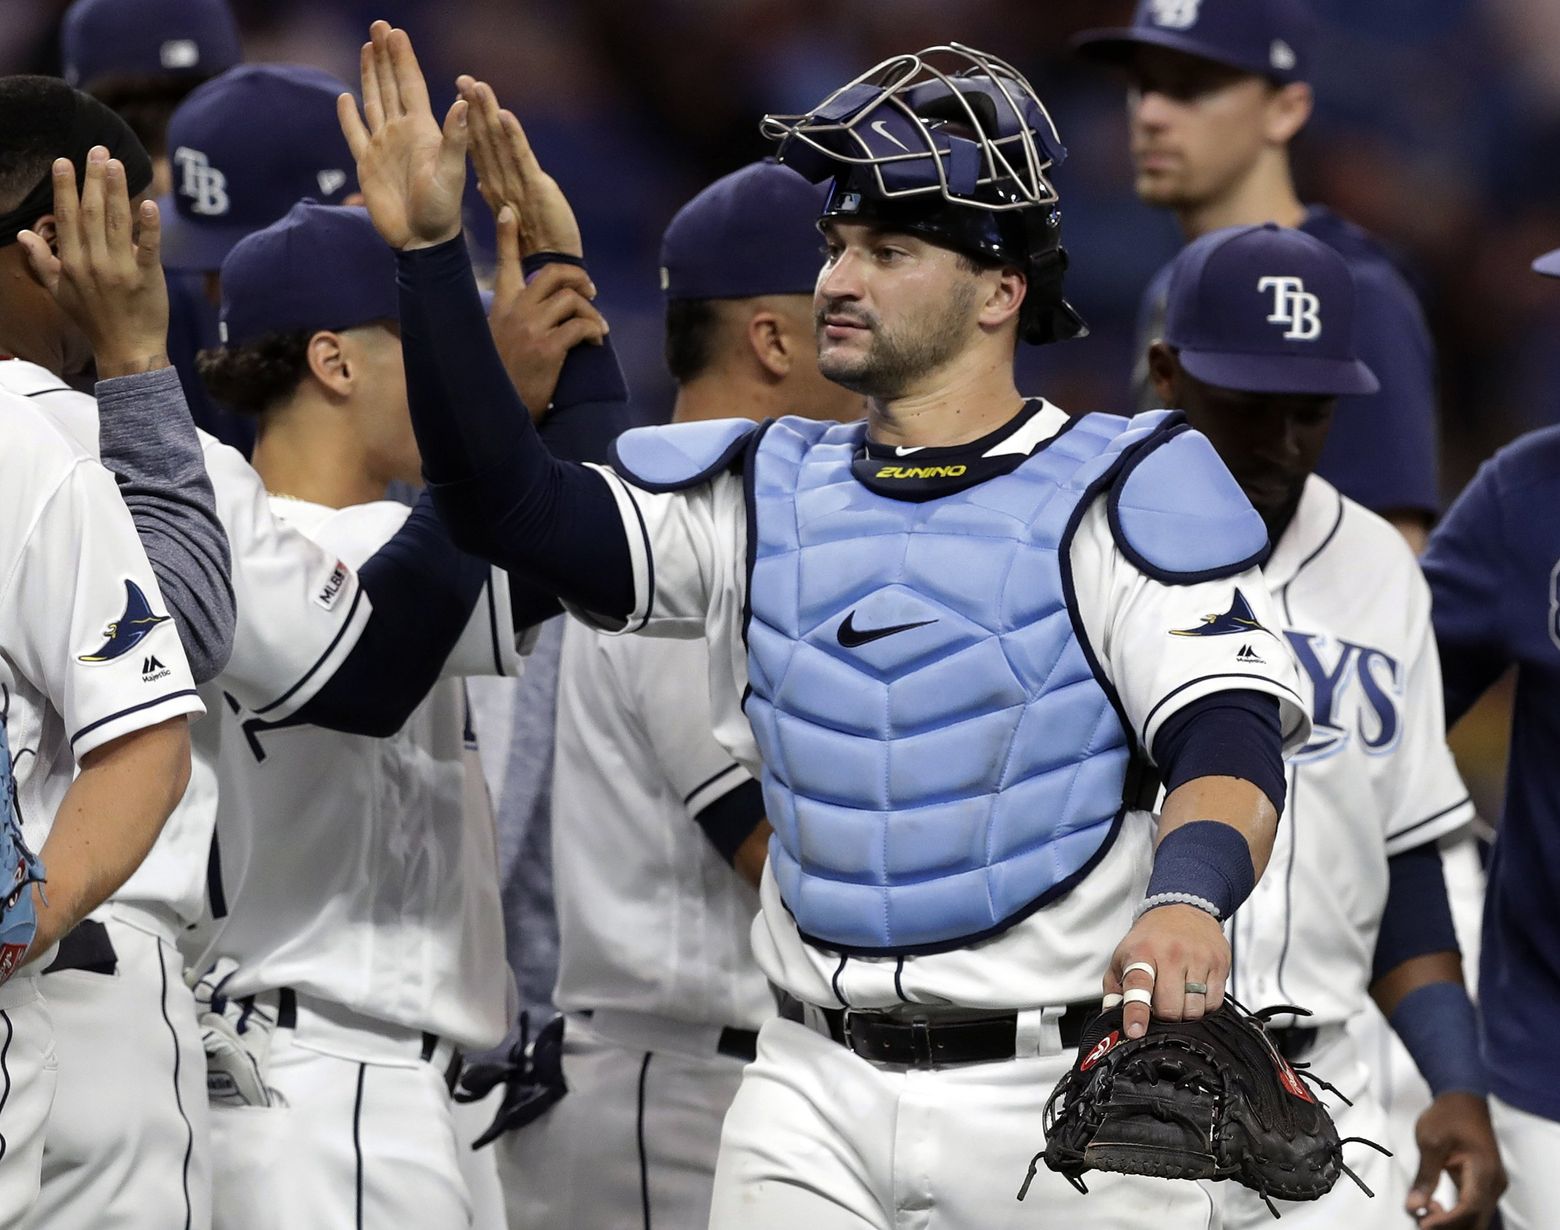 Did the Rays make the right calls on Travis d'Arnaud, Mike Zunino?